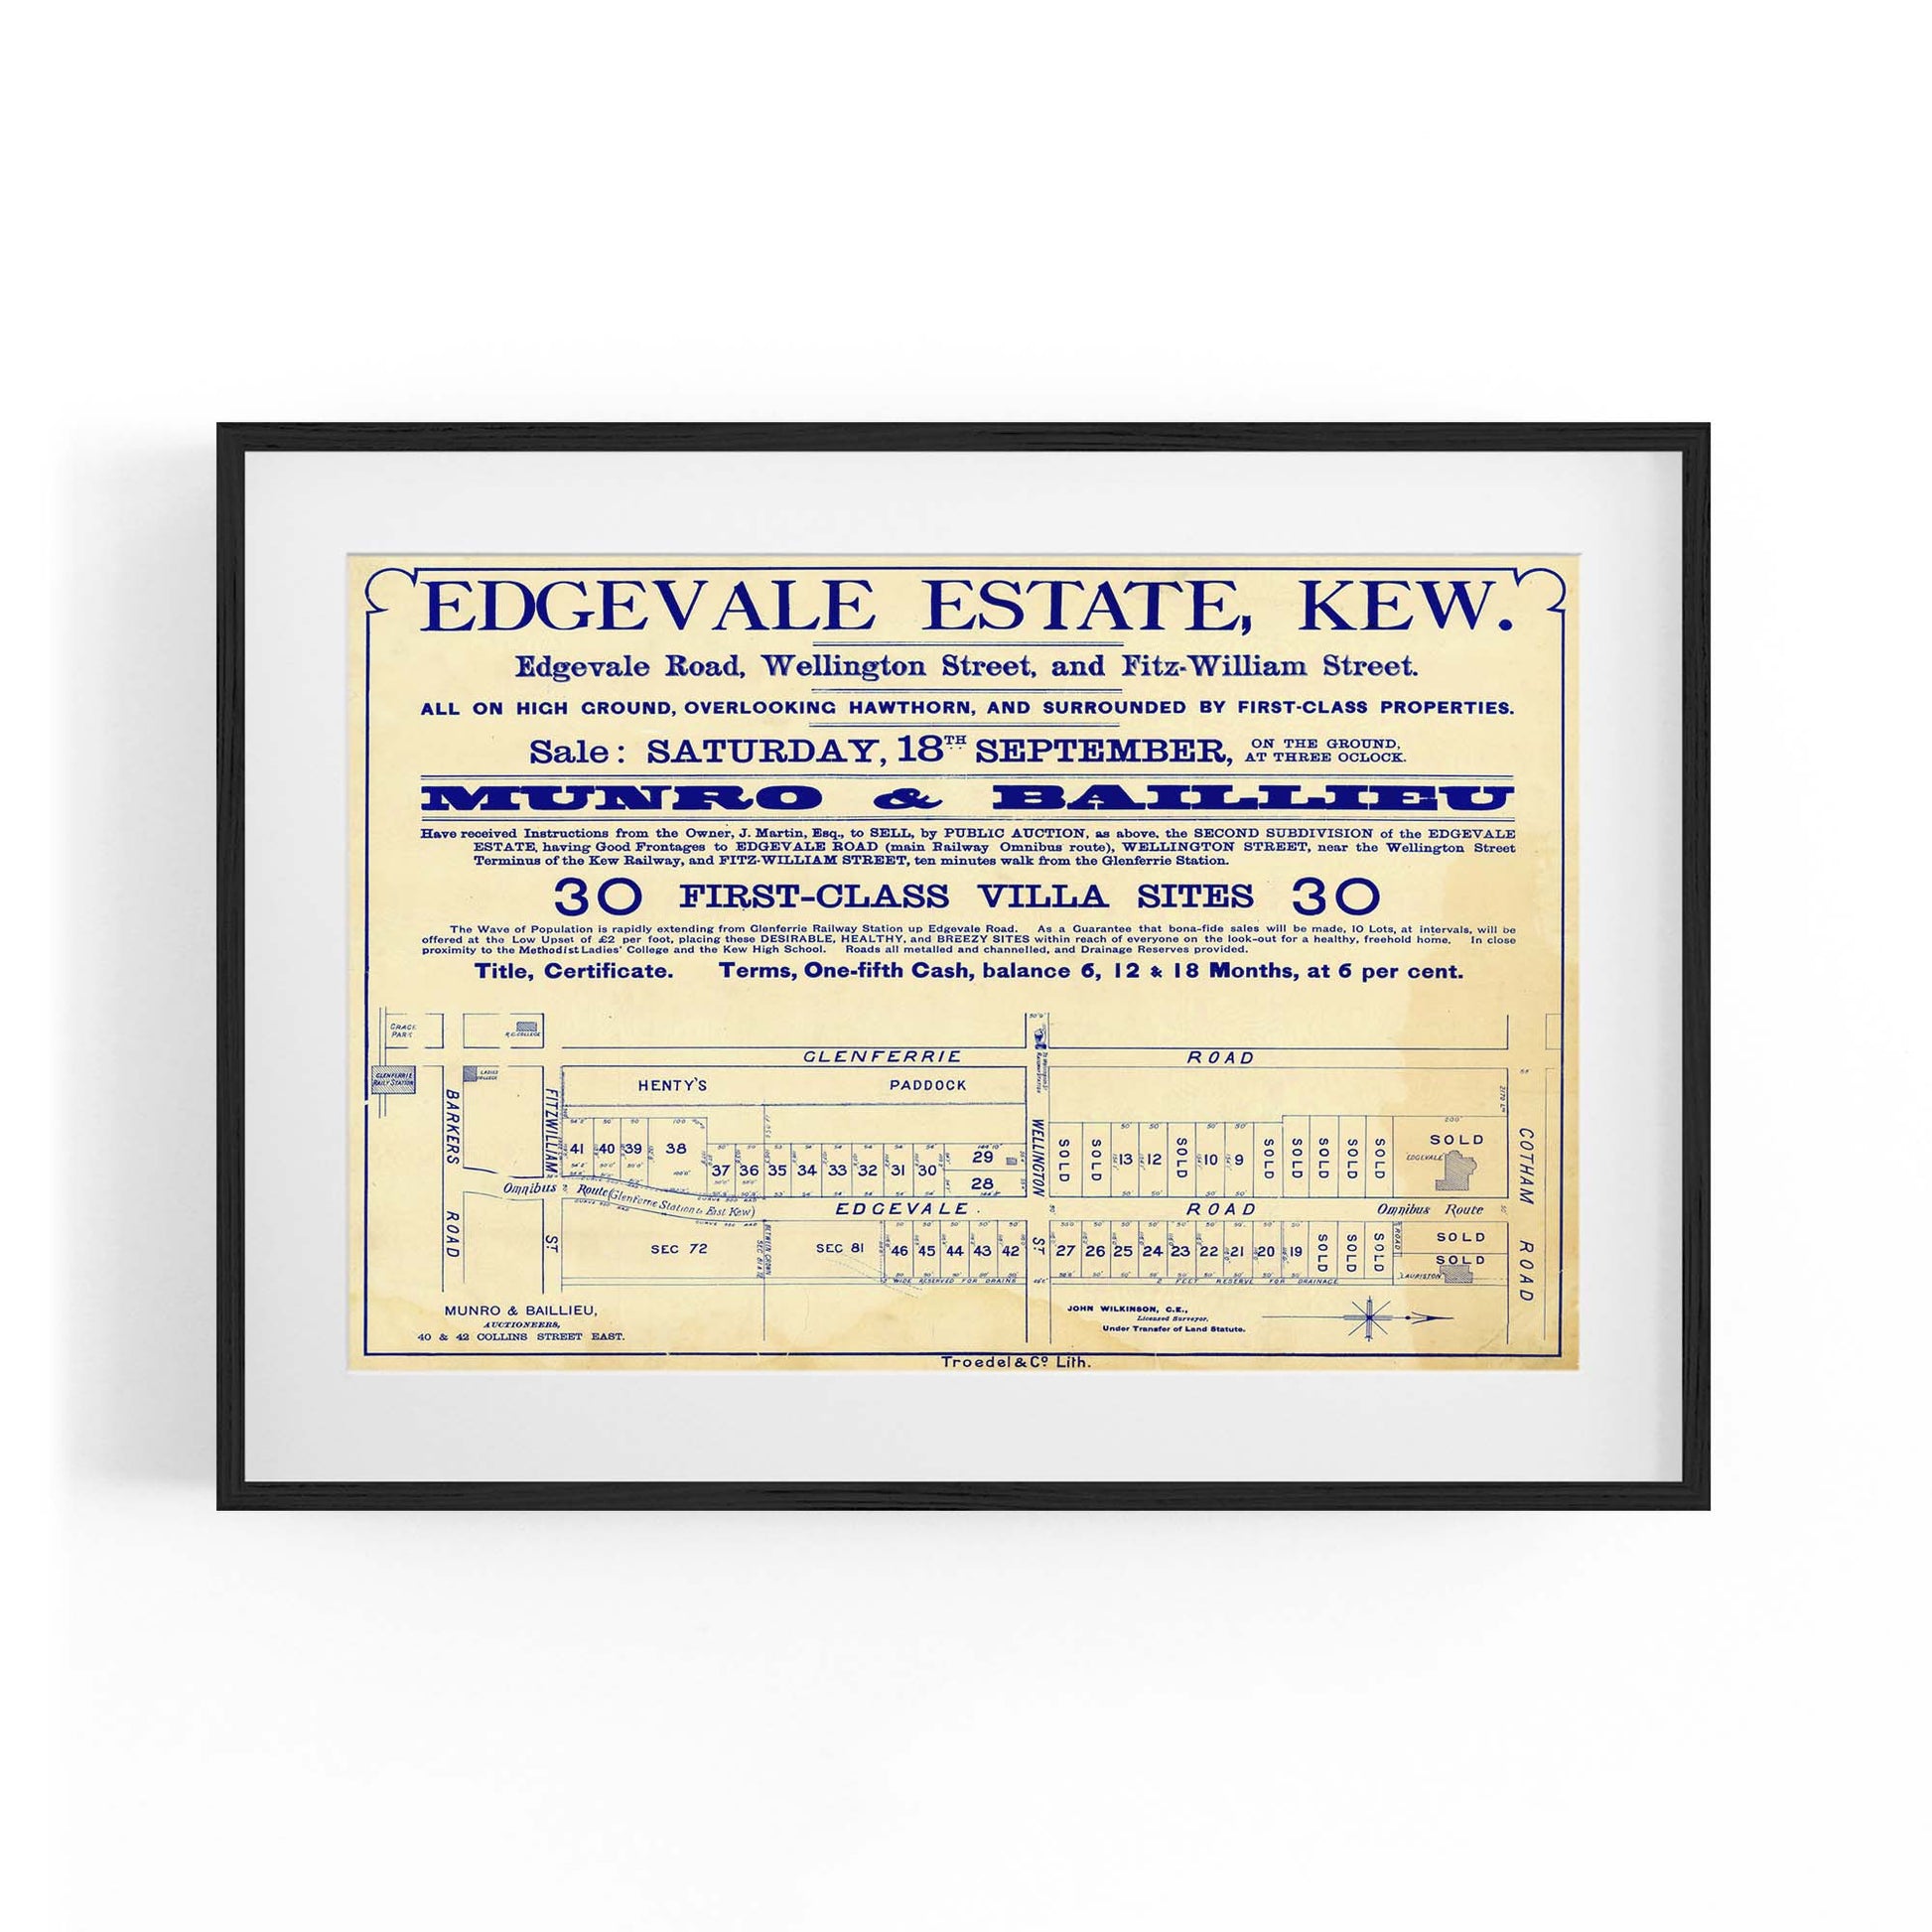 Kew Melbourne Vintage Real Estate Advert Wall Art #3 - The Affordable Art Company